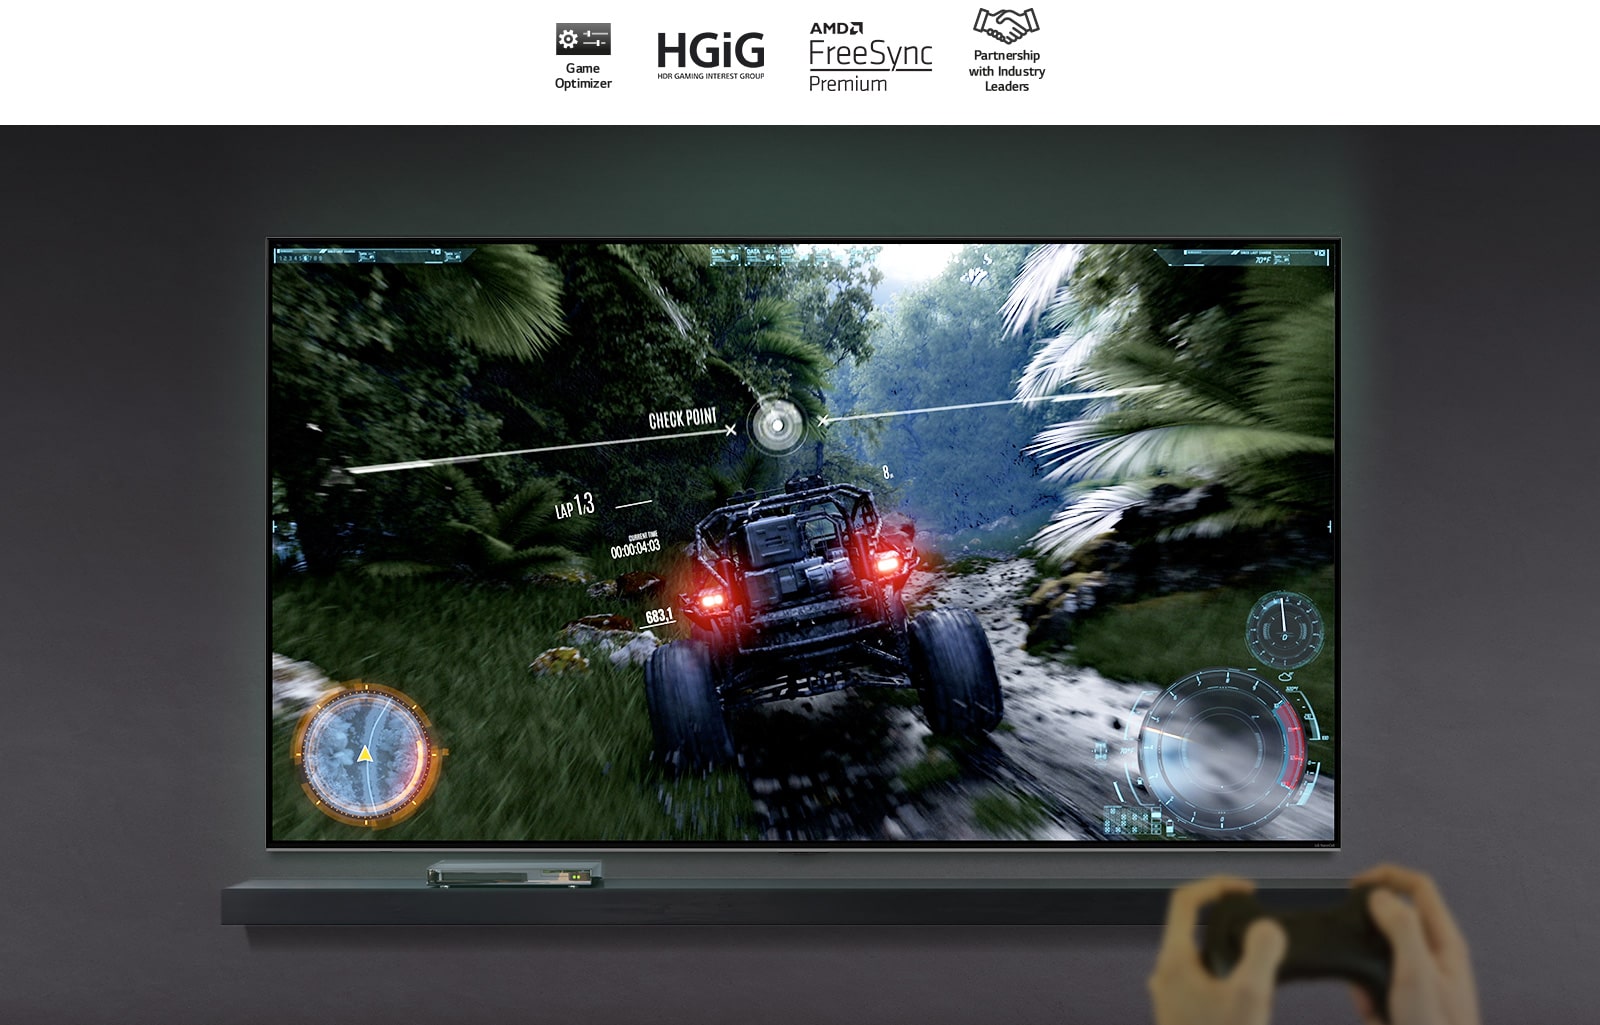 A pair of hands holding a gaming controller in front of a TV. The screen shows a car driving along a dirt track through a forest.